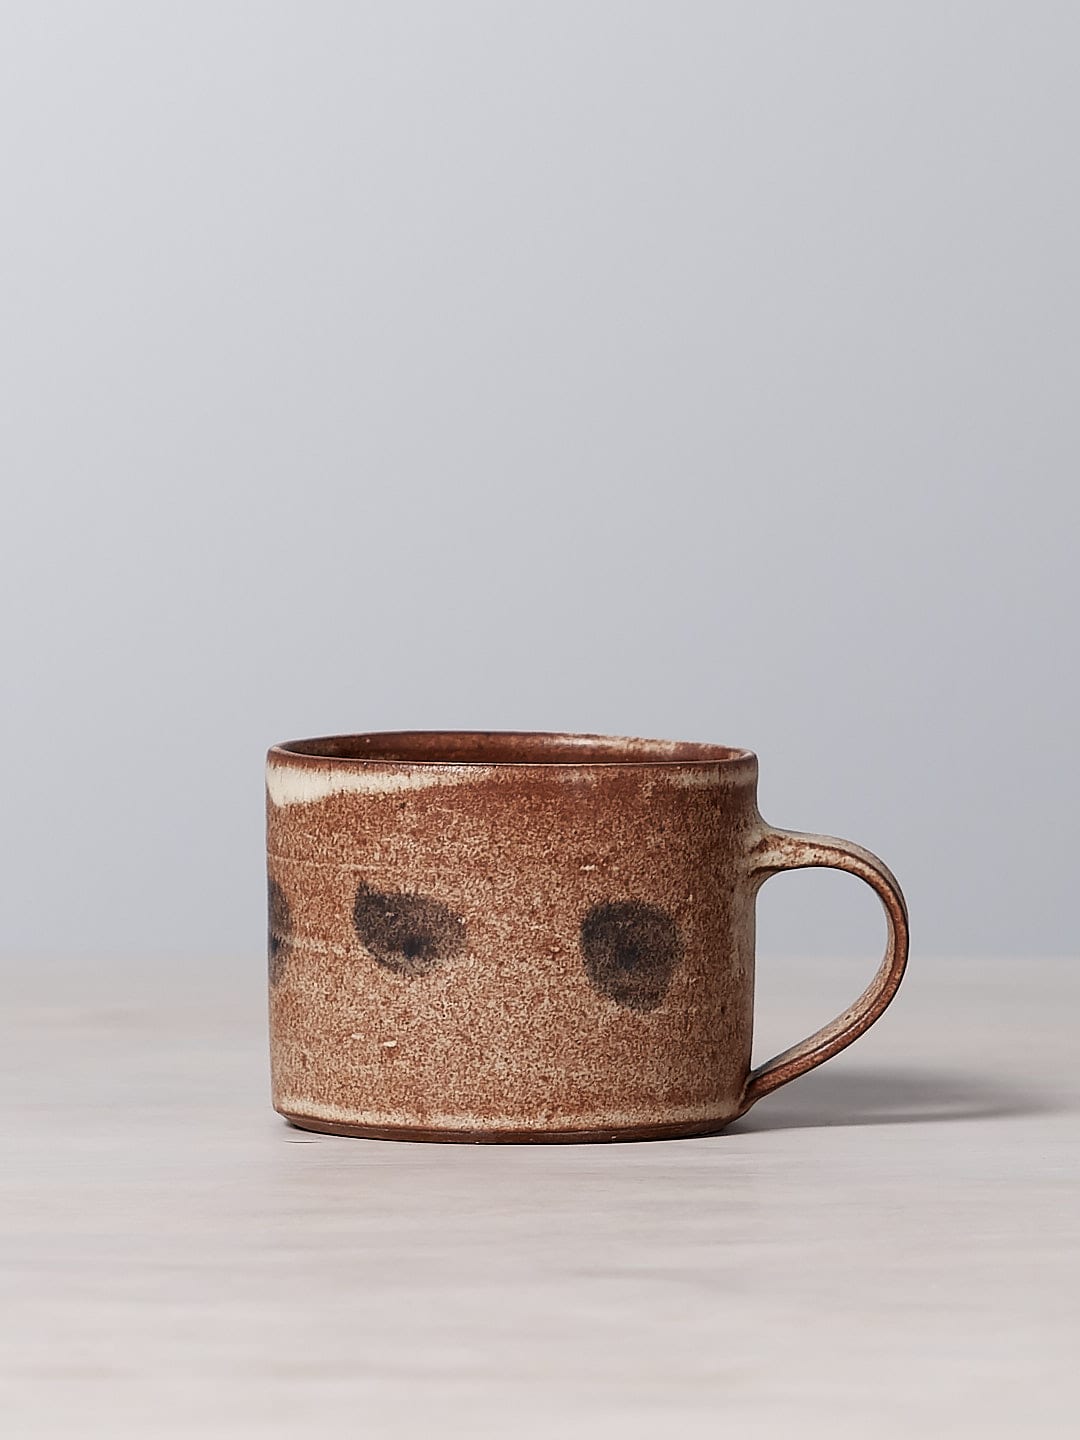 A small brown Spots mug with a matte cream glaze sitting on a wooden table.